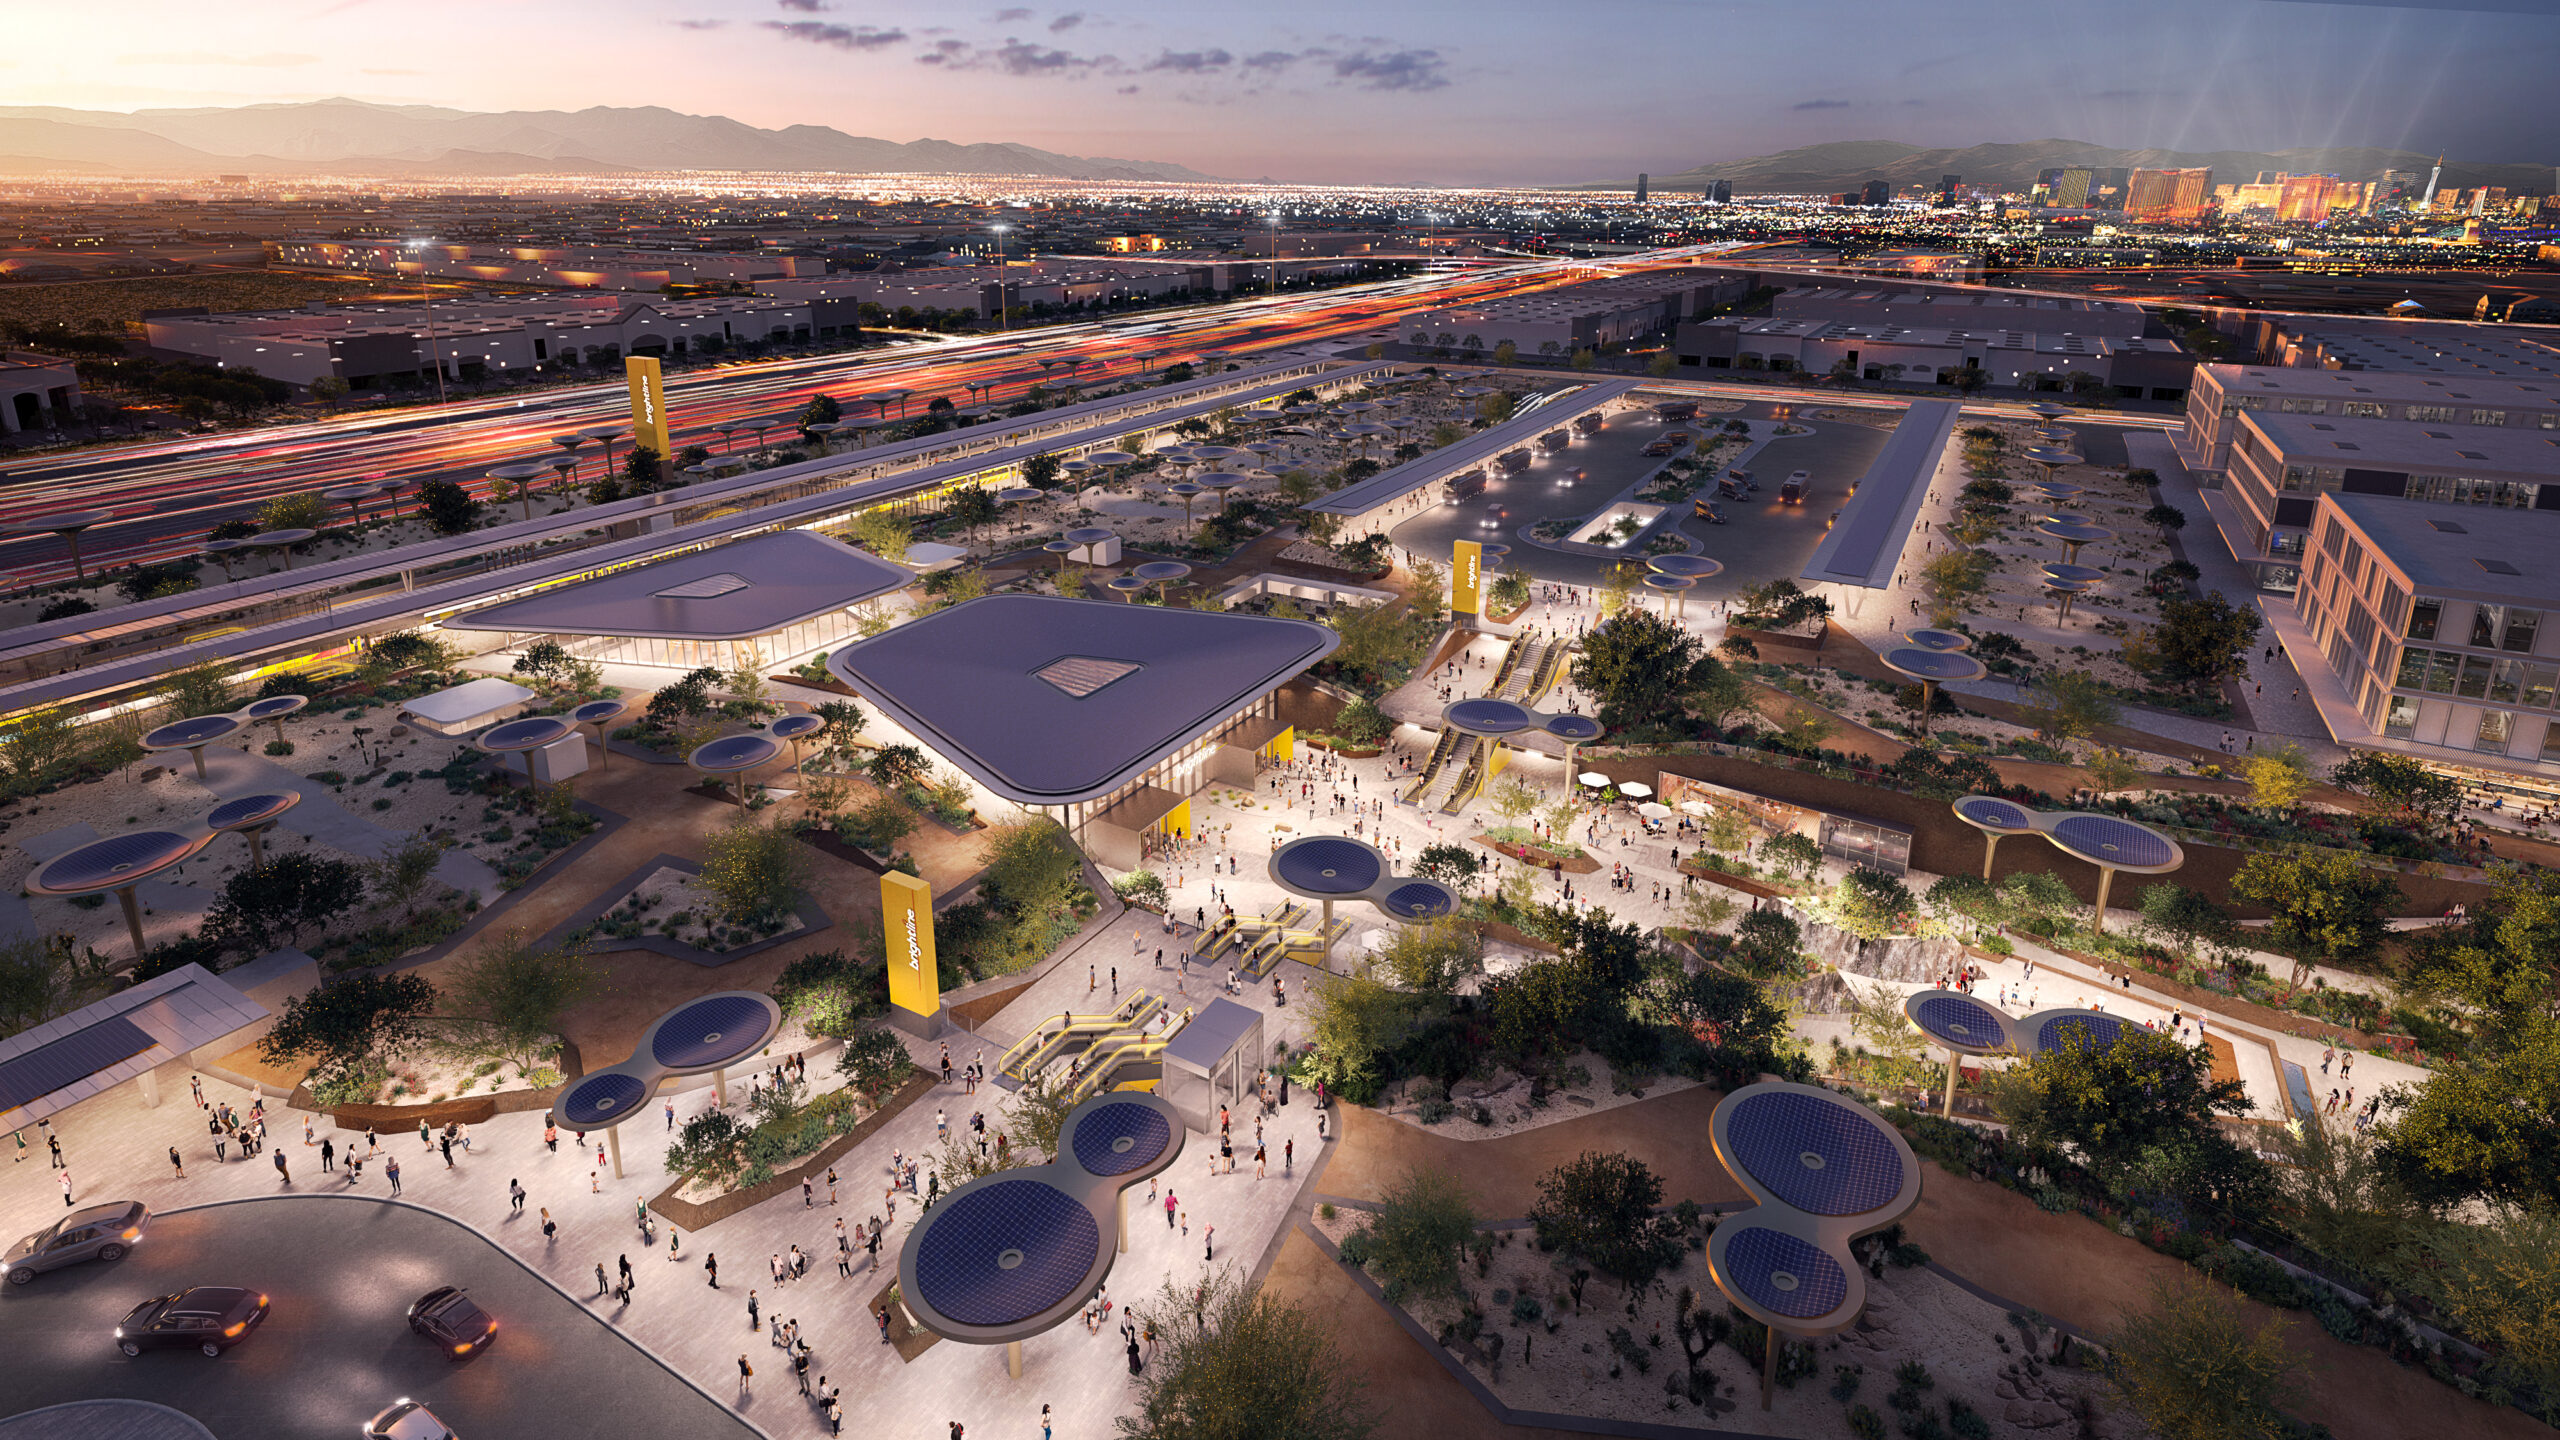 An aerial rendering of the future Las Vegas station